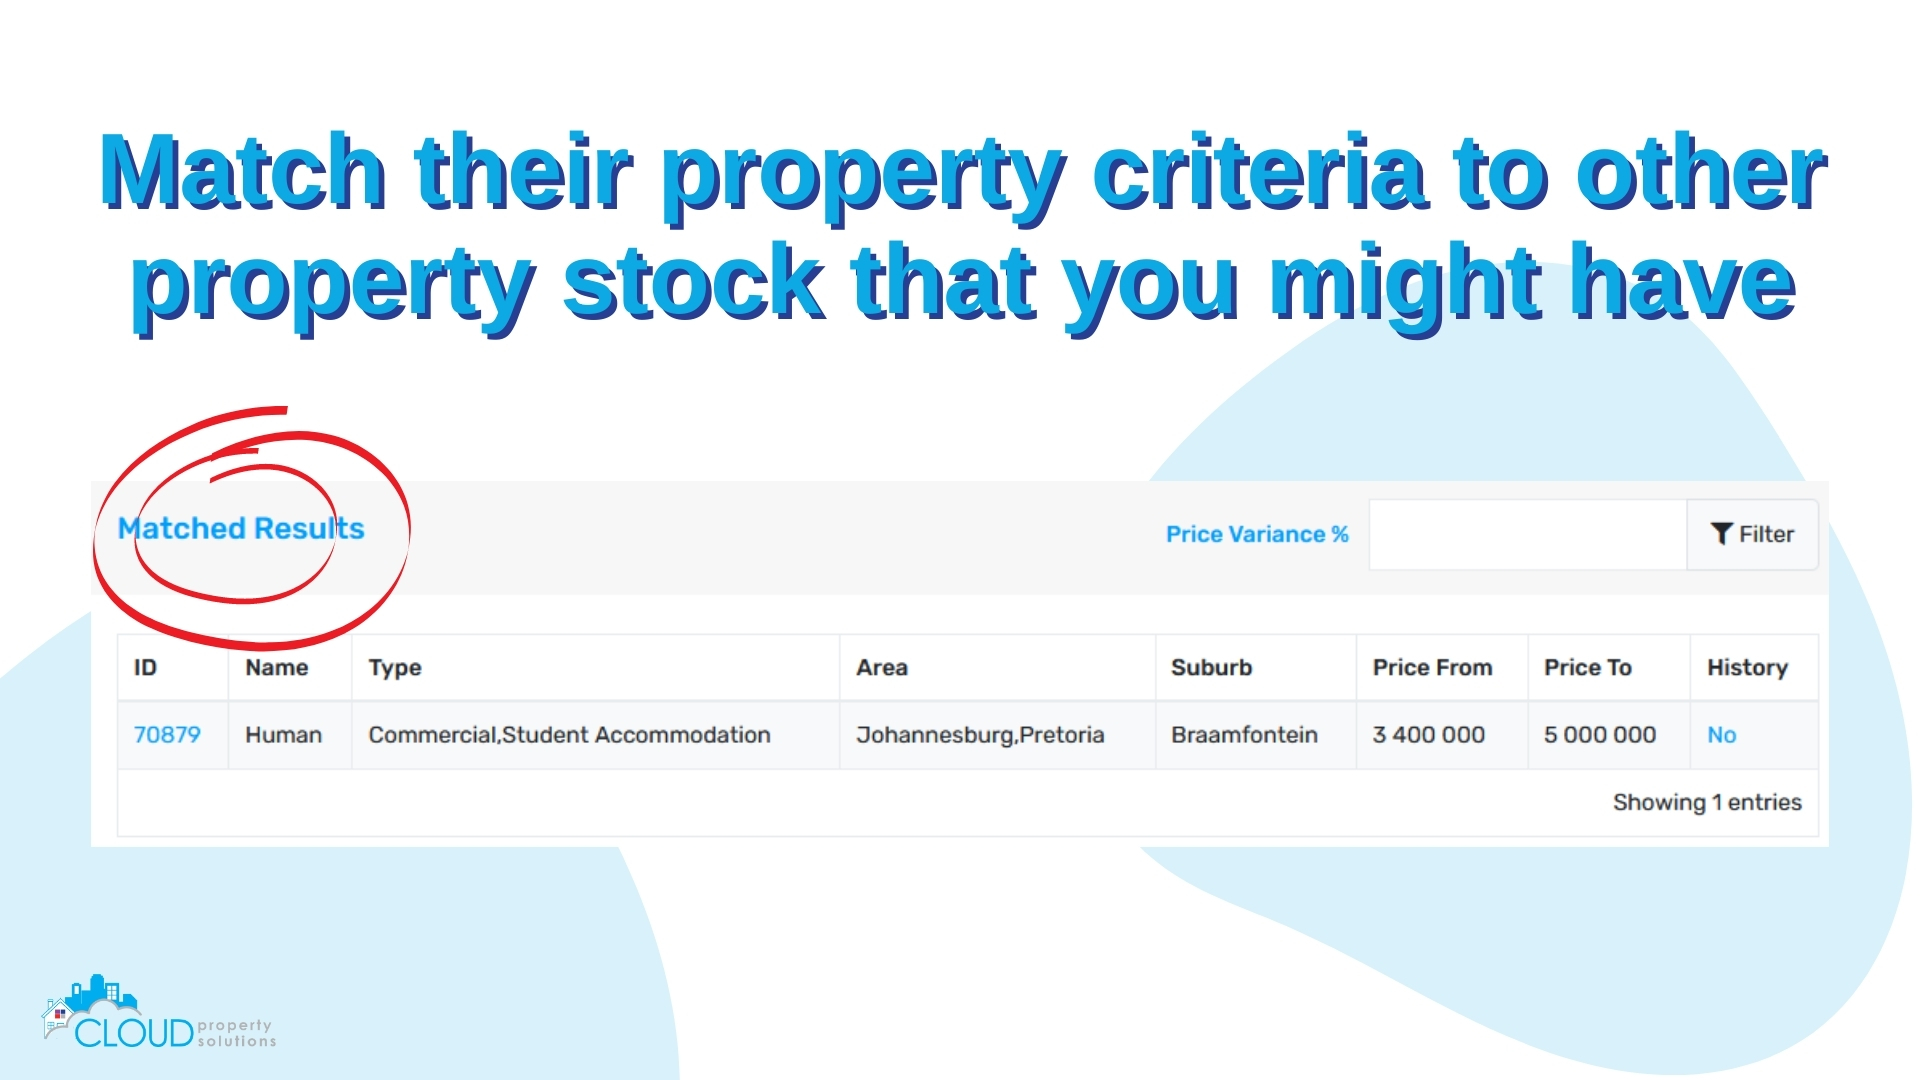 After adding their criteria you can match them up to your other property stock.